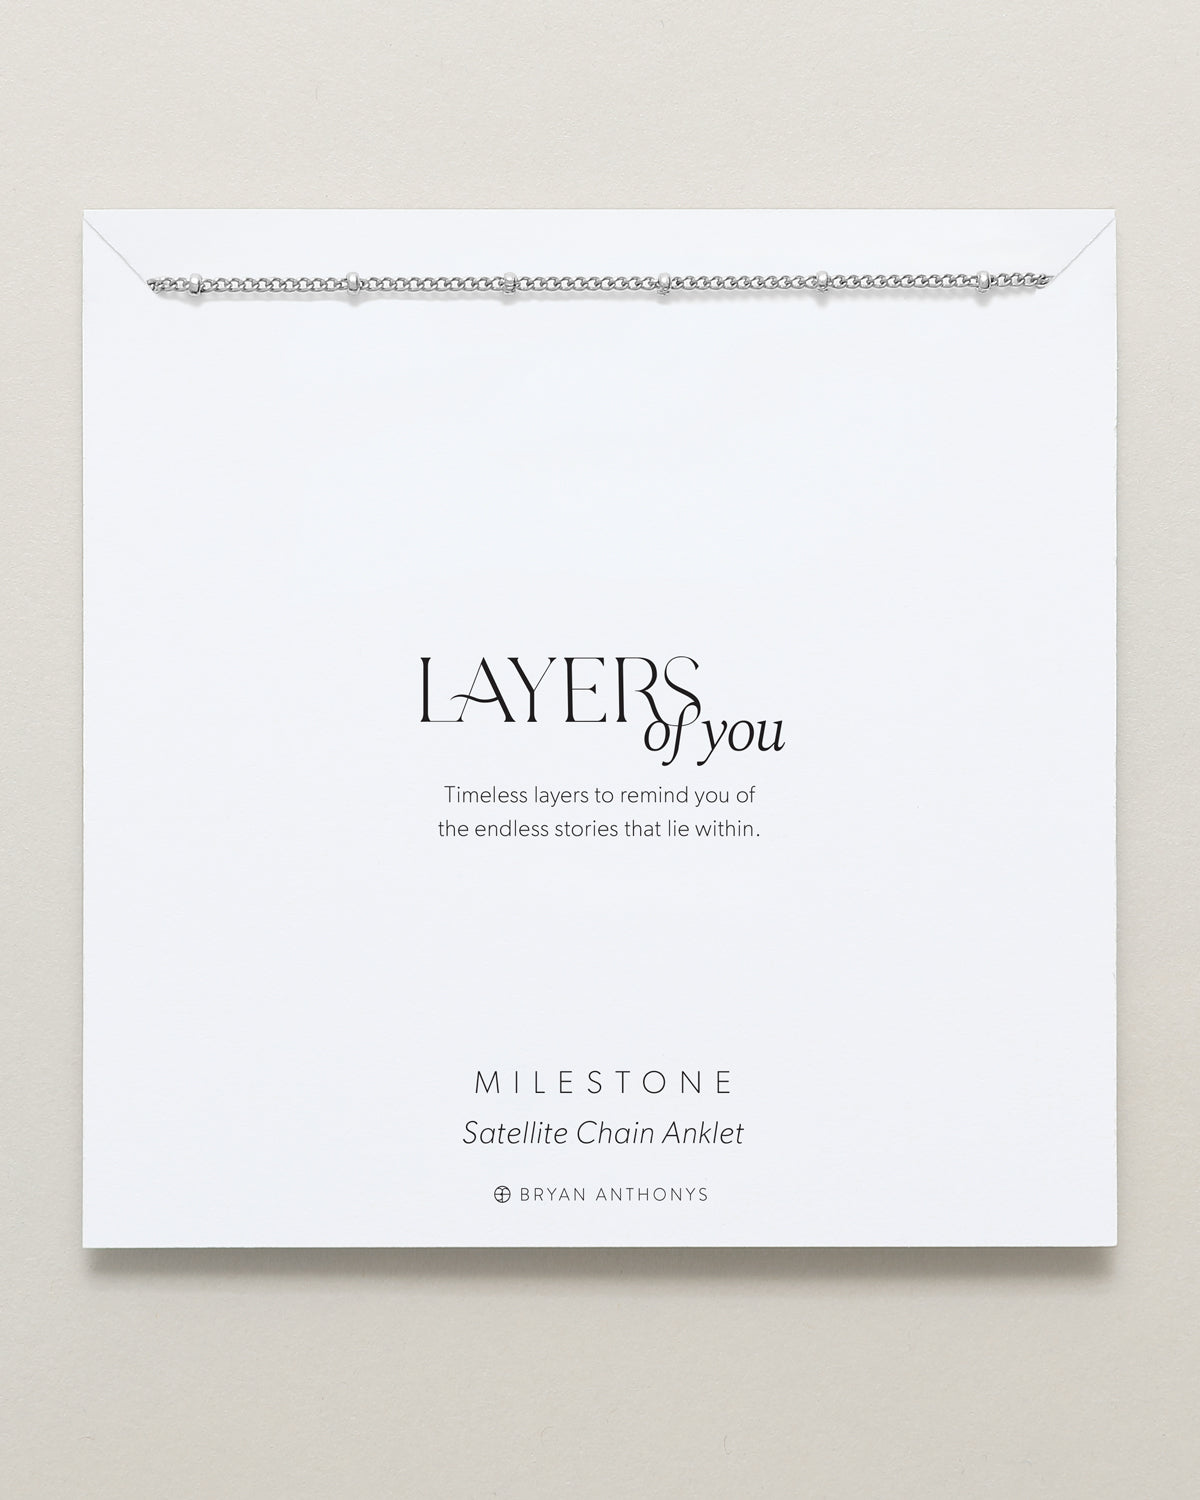 Bryan Anthonys Layers of You Milestone Silver Satellite Chain Anklet On Card